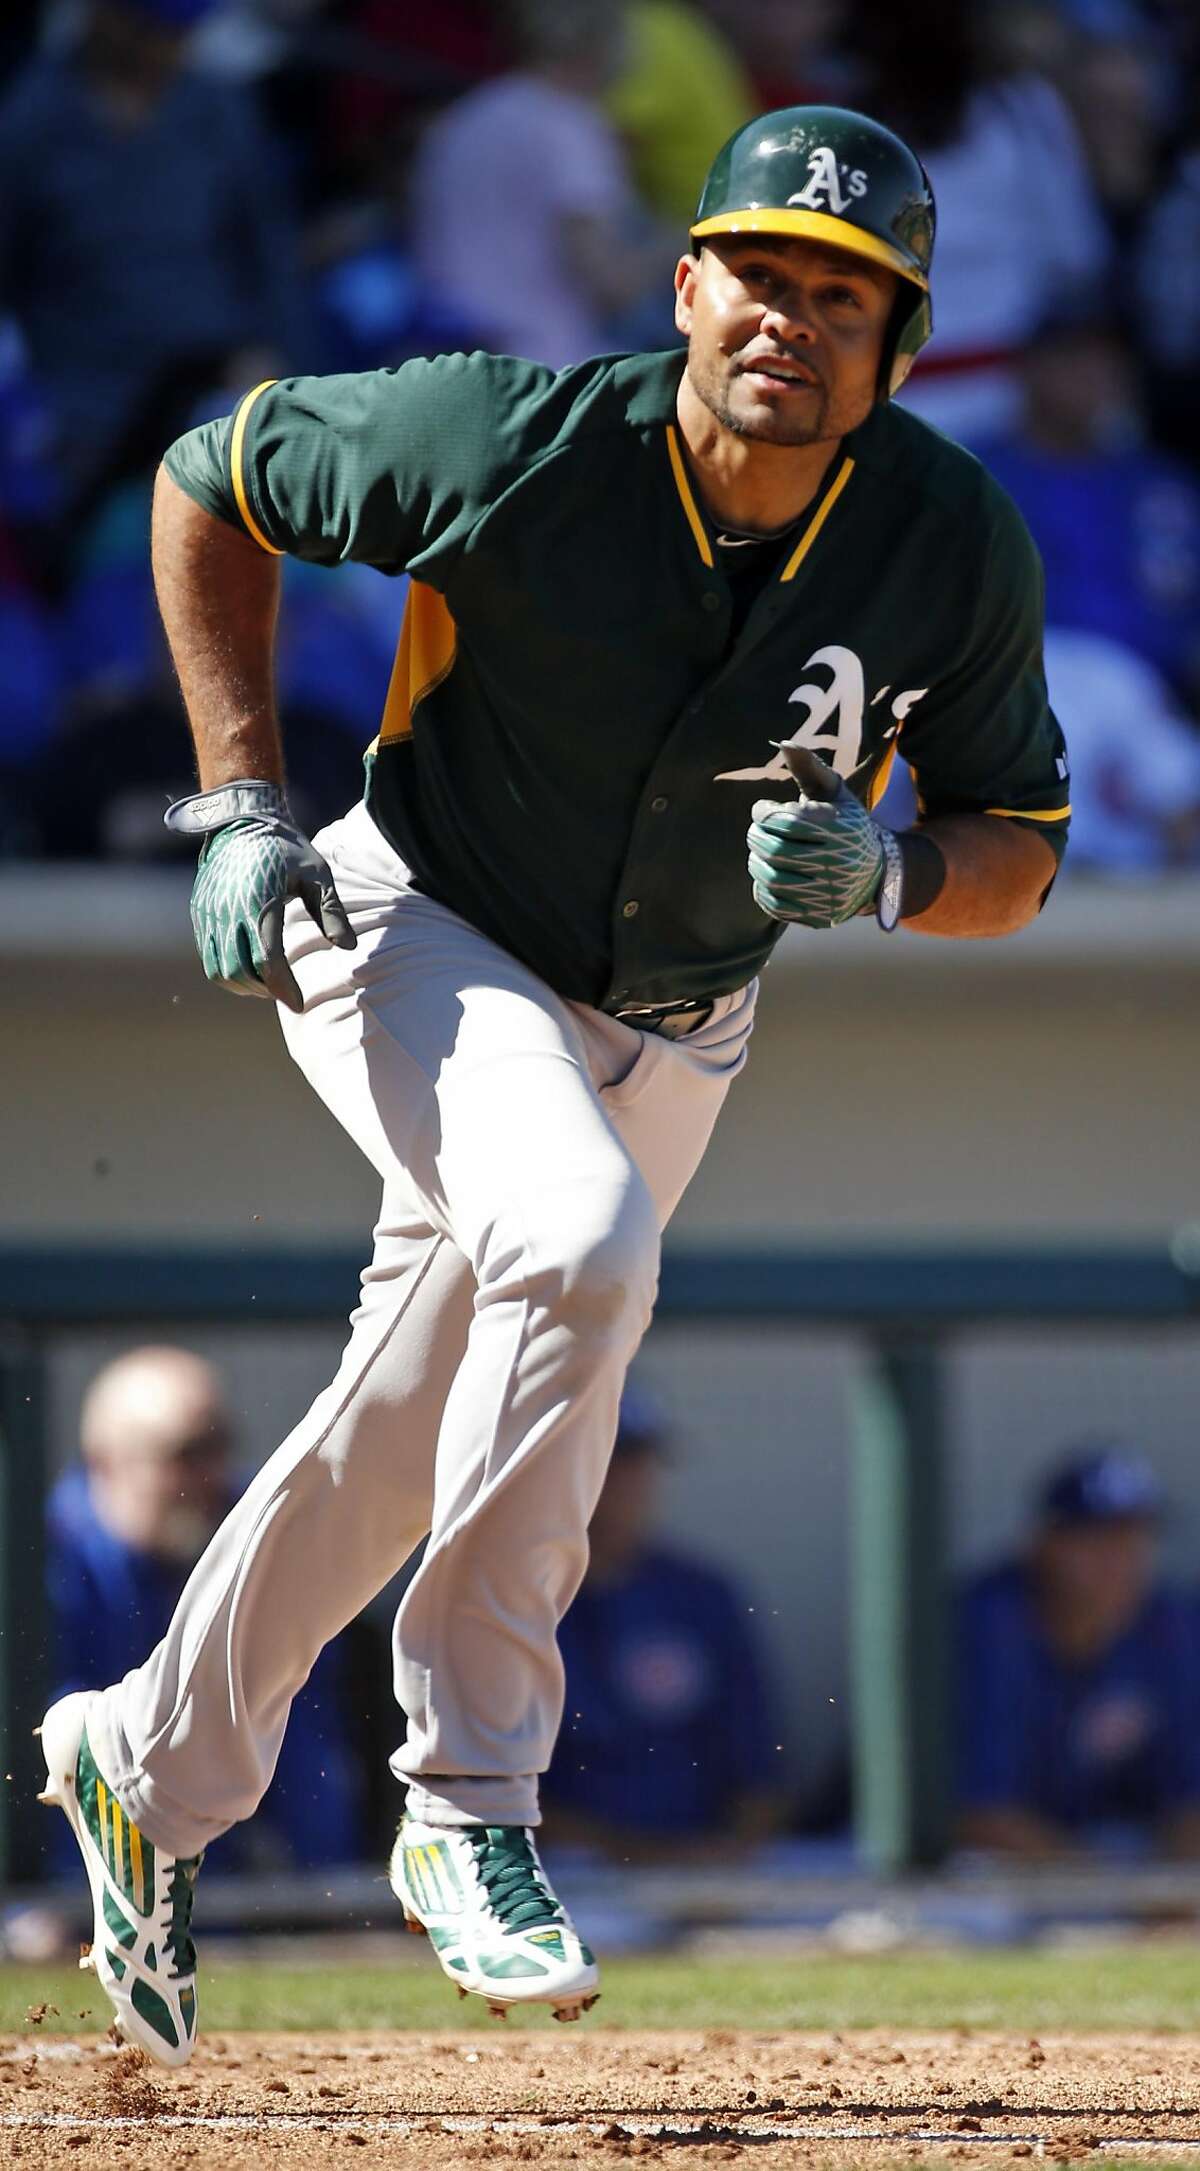 Oakland Athletics' Coco Crisp pops out in 4th inning against Chicago Cubs in Spring Training Cactus League game at Sloan Park in Mesa, Arizona, on Thursday, March 5, 2015.